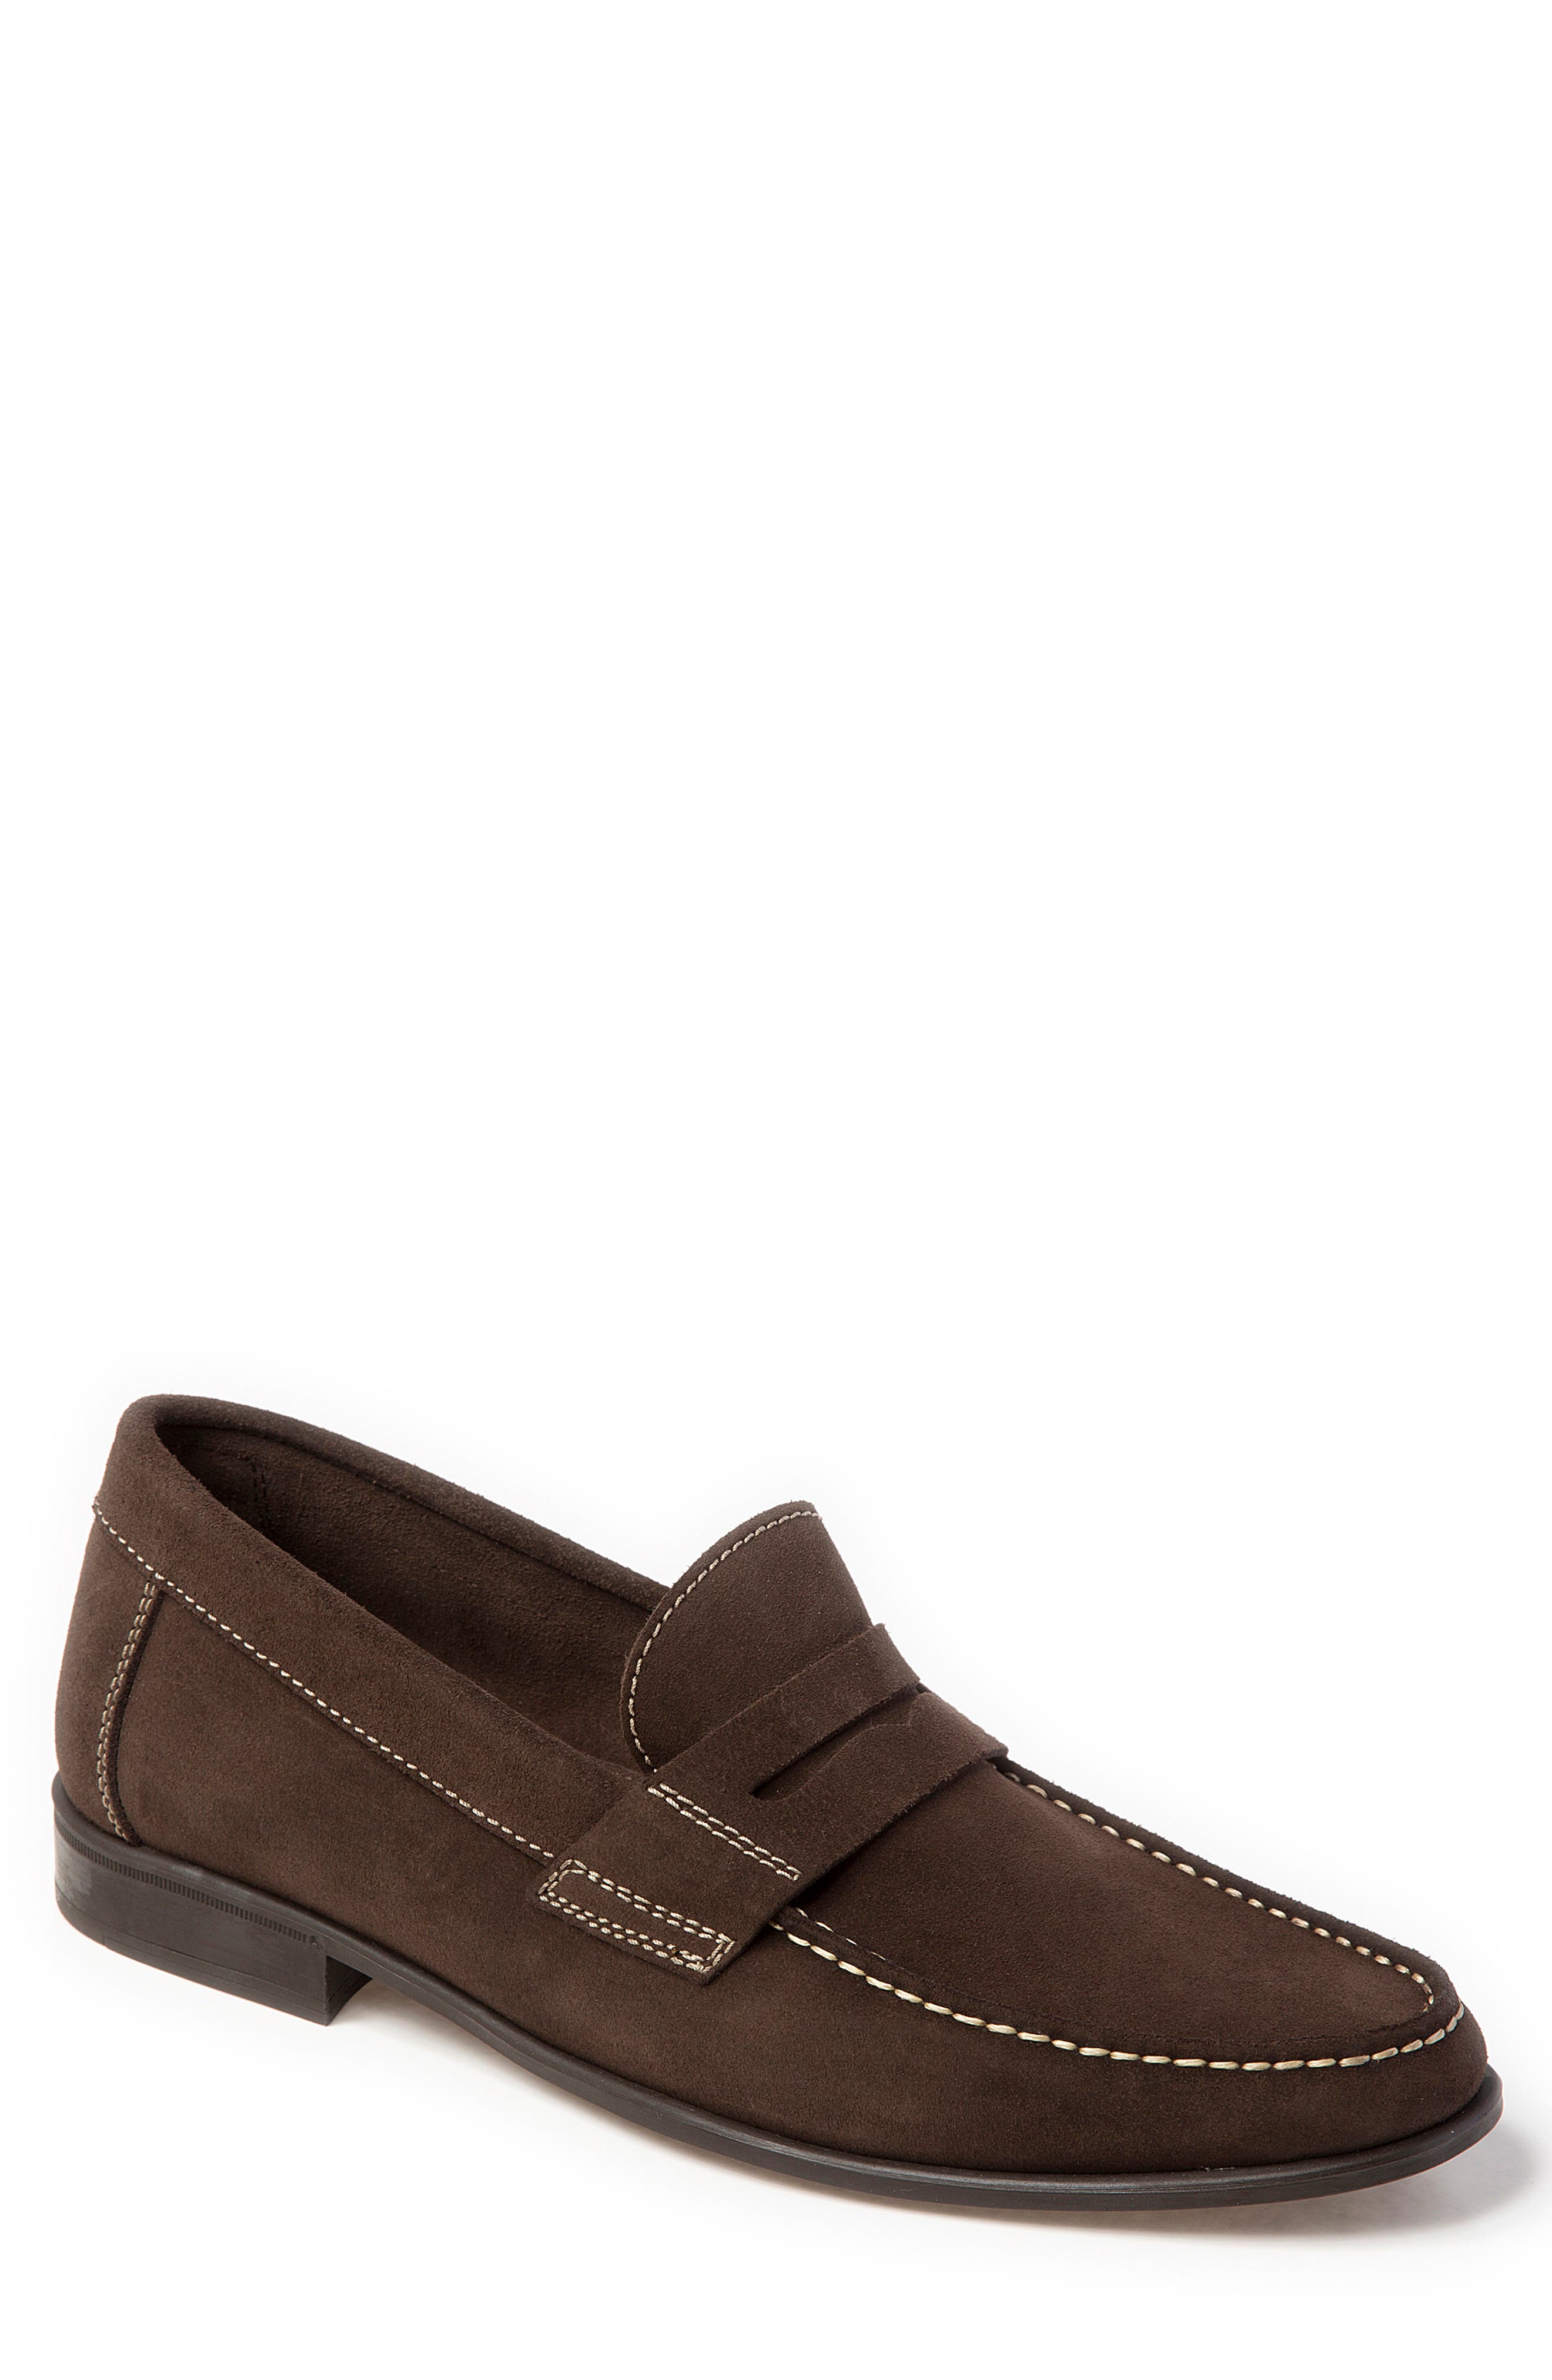 Sandro Moscoloni Leo Moc Toe Penny Loafer In Brown